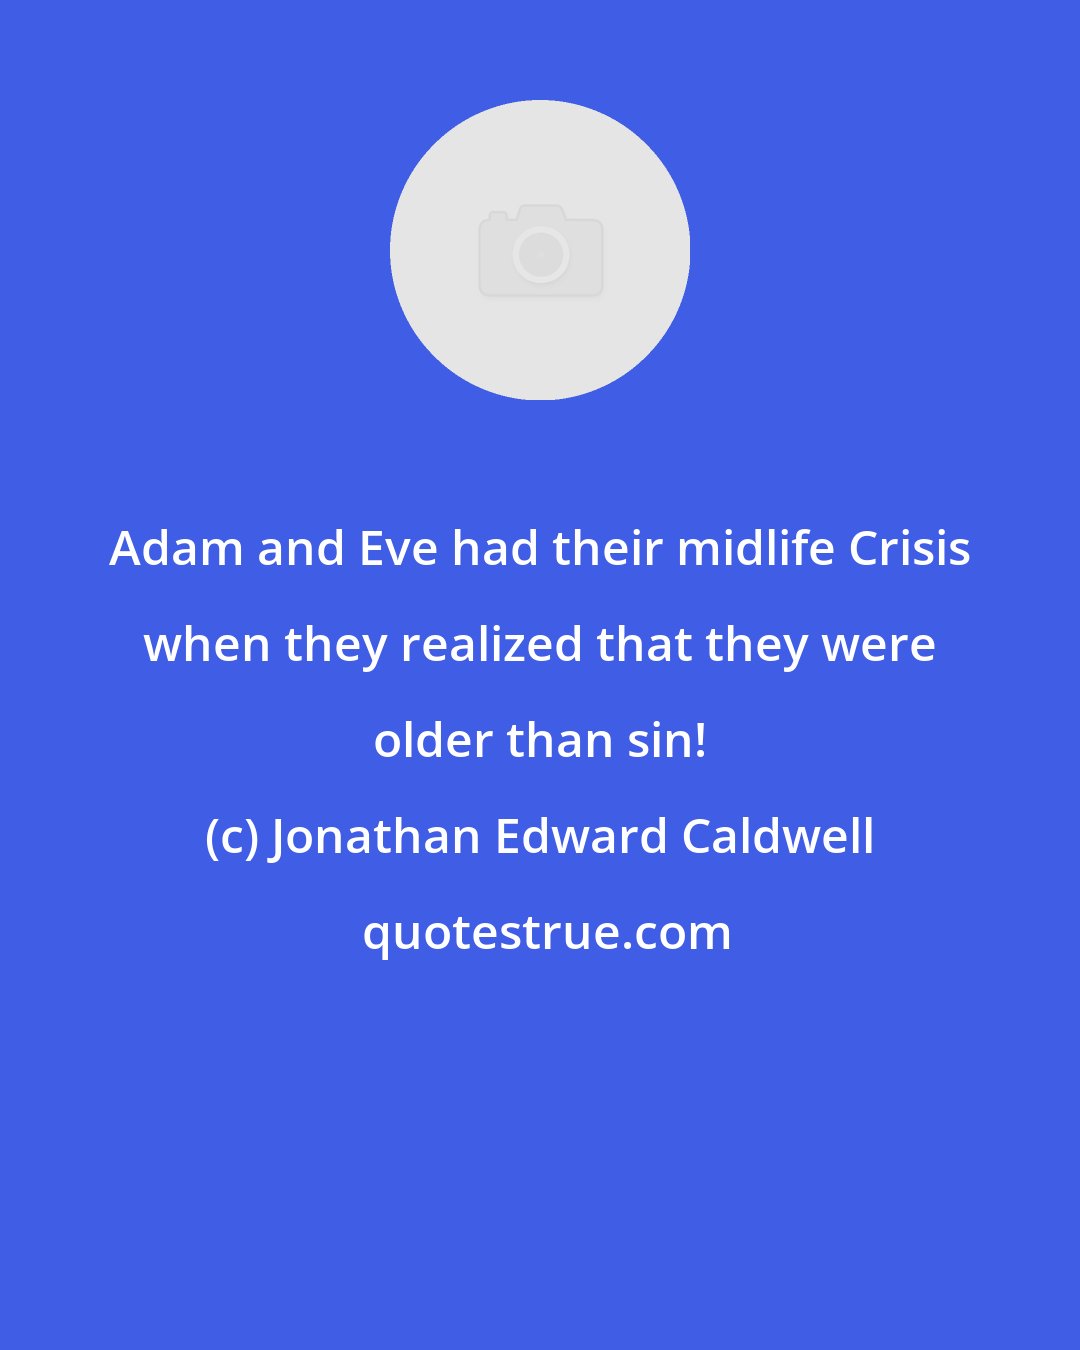 Jonathan Edward Caldwell: Adam and Eve had their midlife Crisis when they realized that they were older than sin!